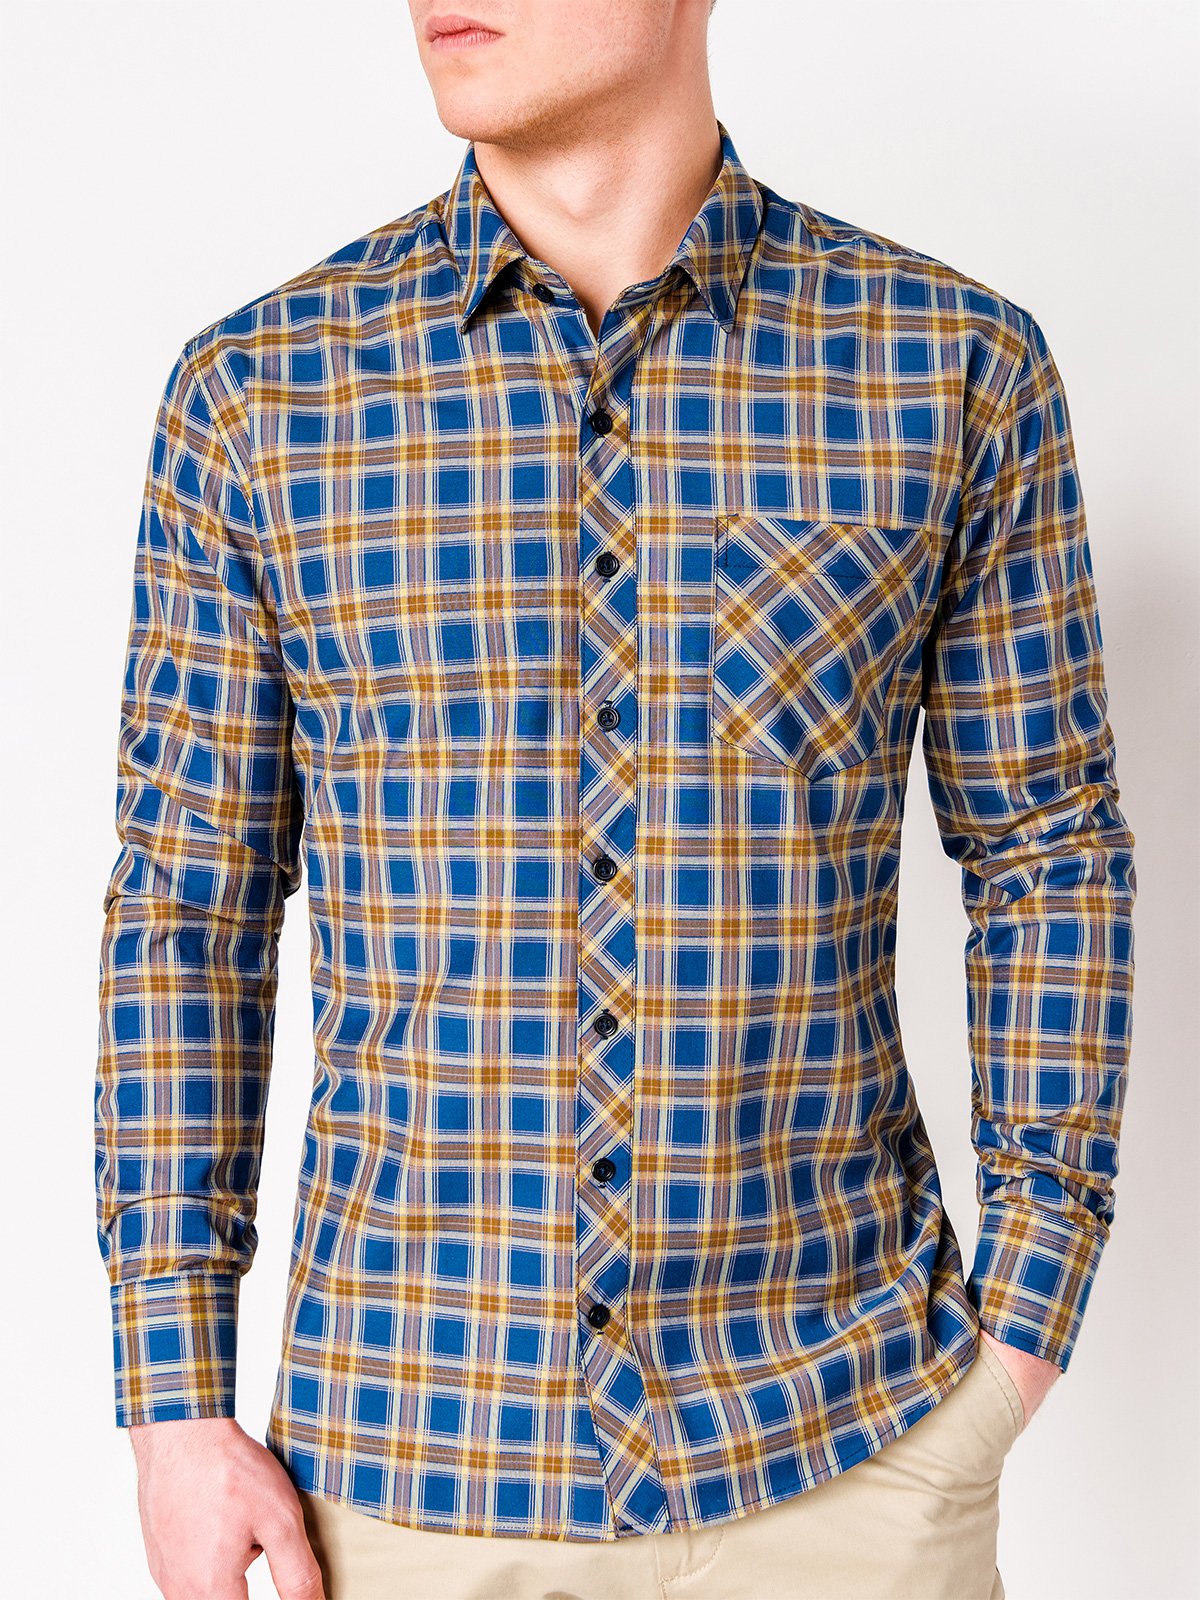 Men's check shirt with long sleeves K418 - navy/yellow | MODONE ...